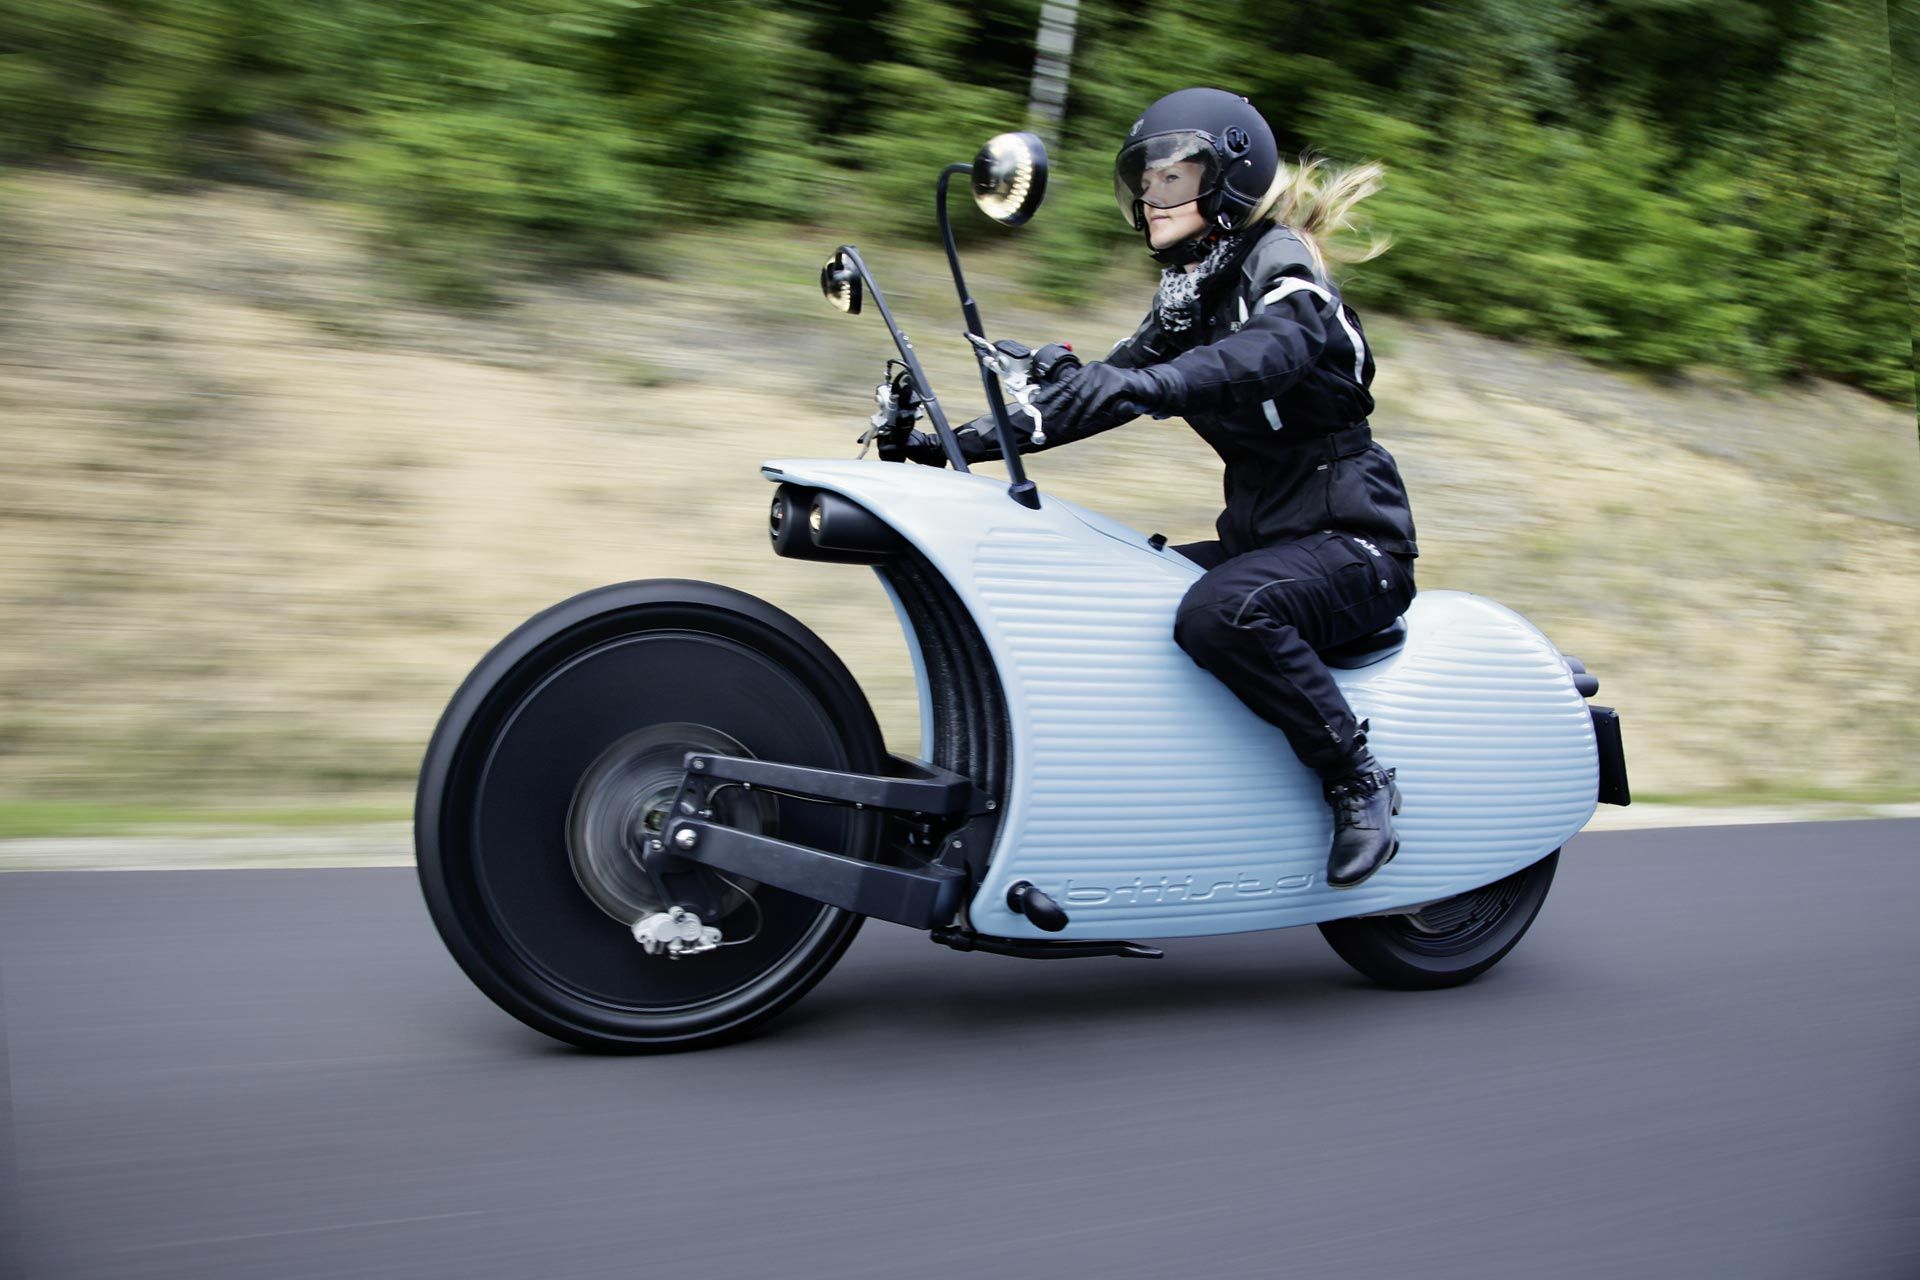 Female motorcycle rider on the Johammer J1 electric motorcycle.